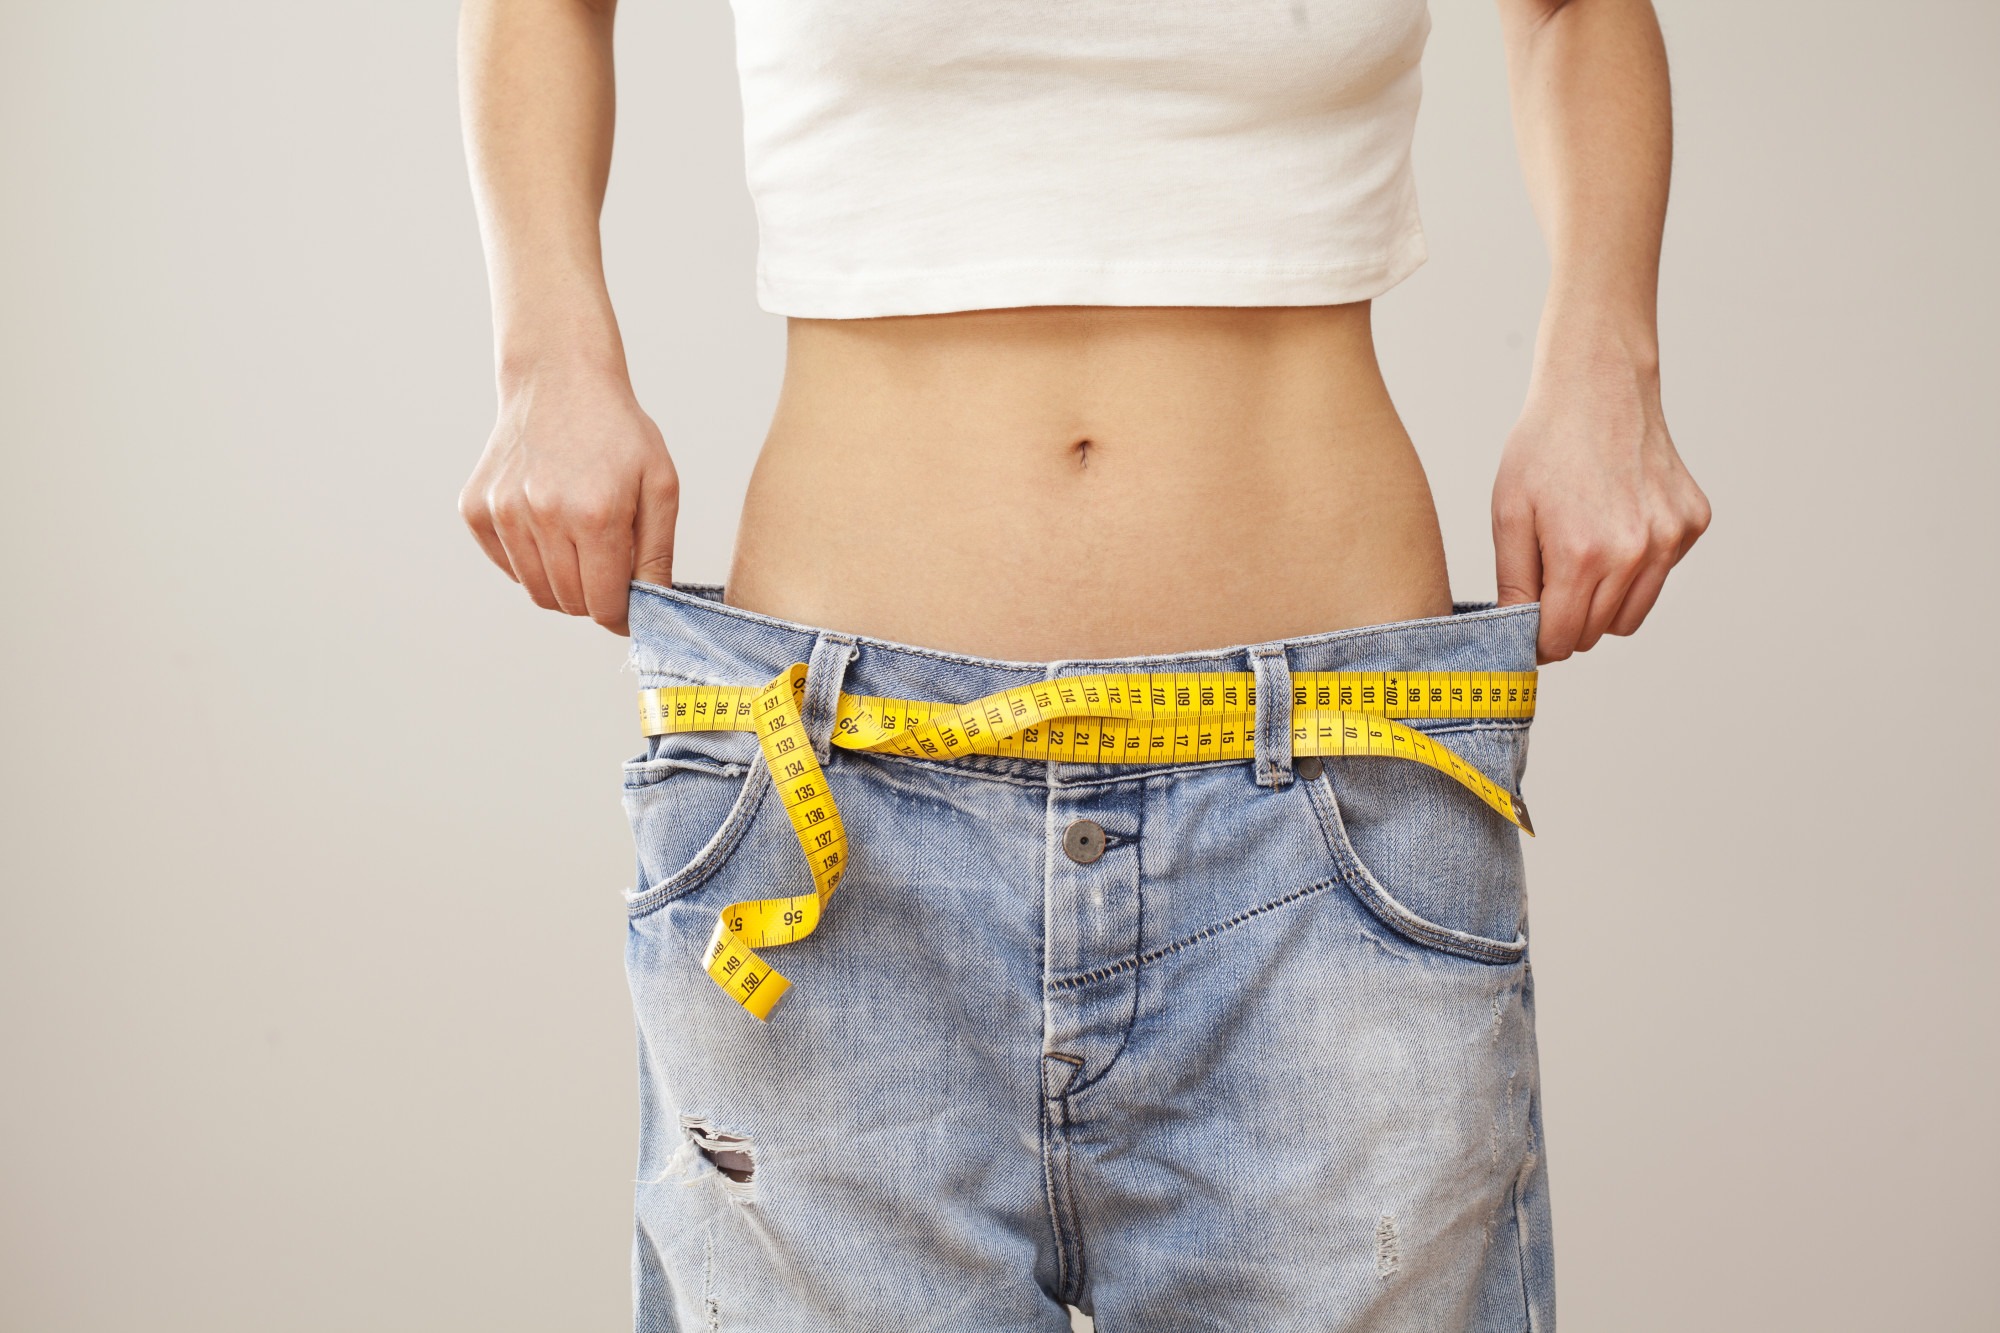 HCG Drops for Weight Loss: Everything You Need to Know